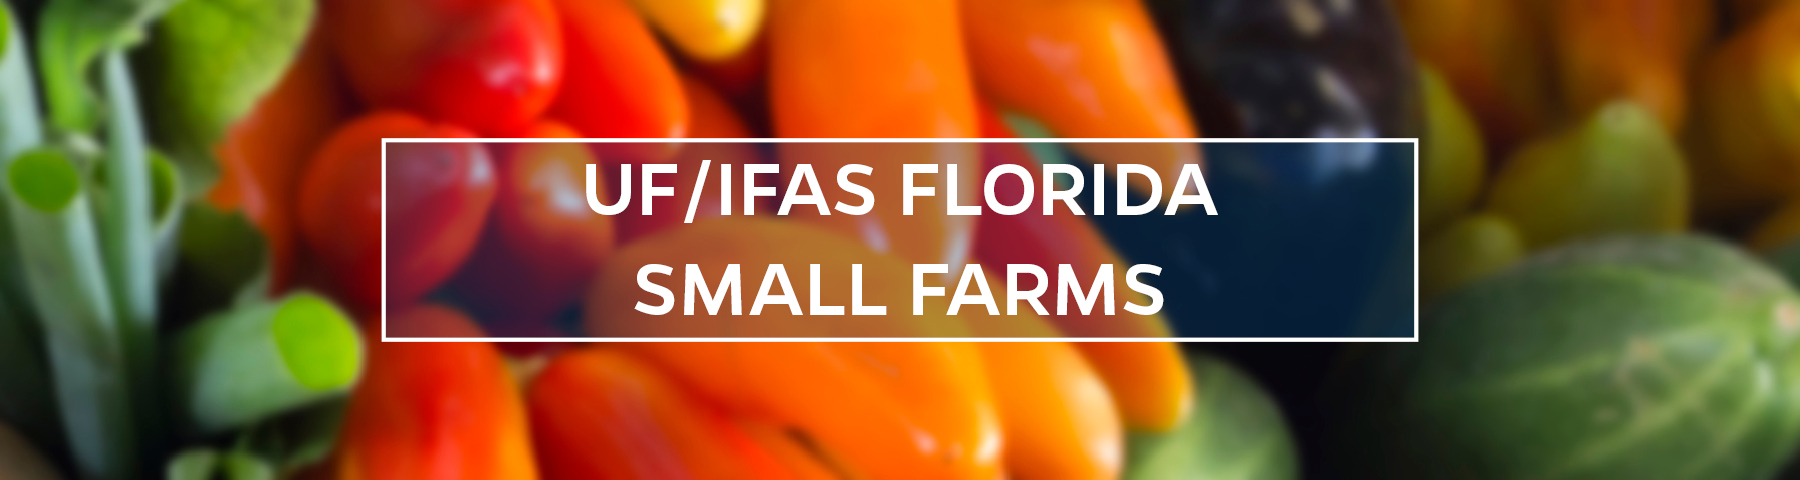 UF/IFAS Florida Small Farms